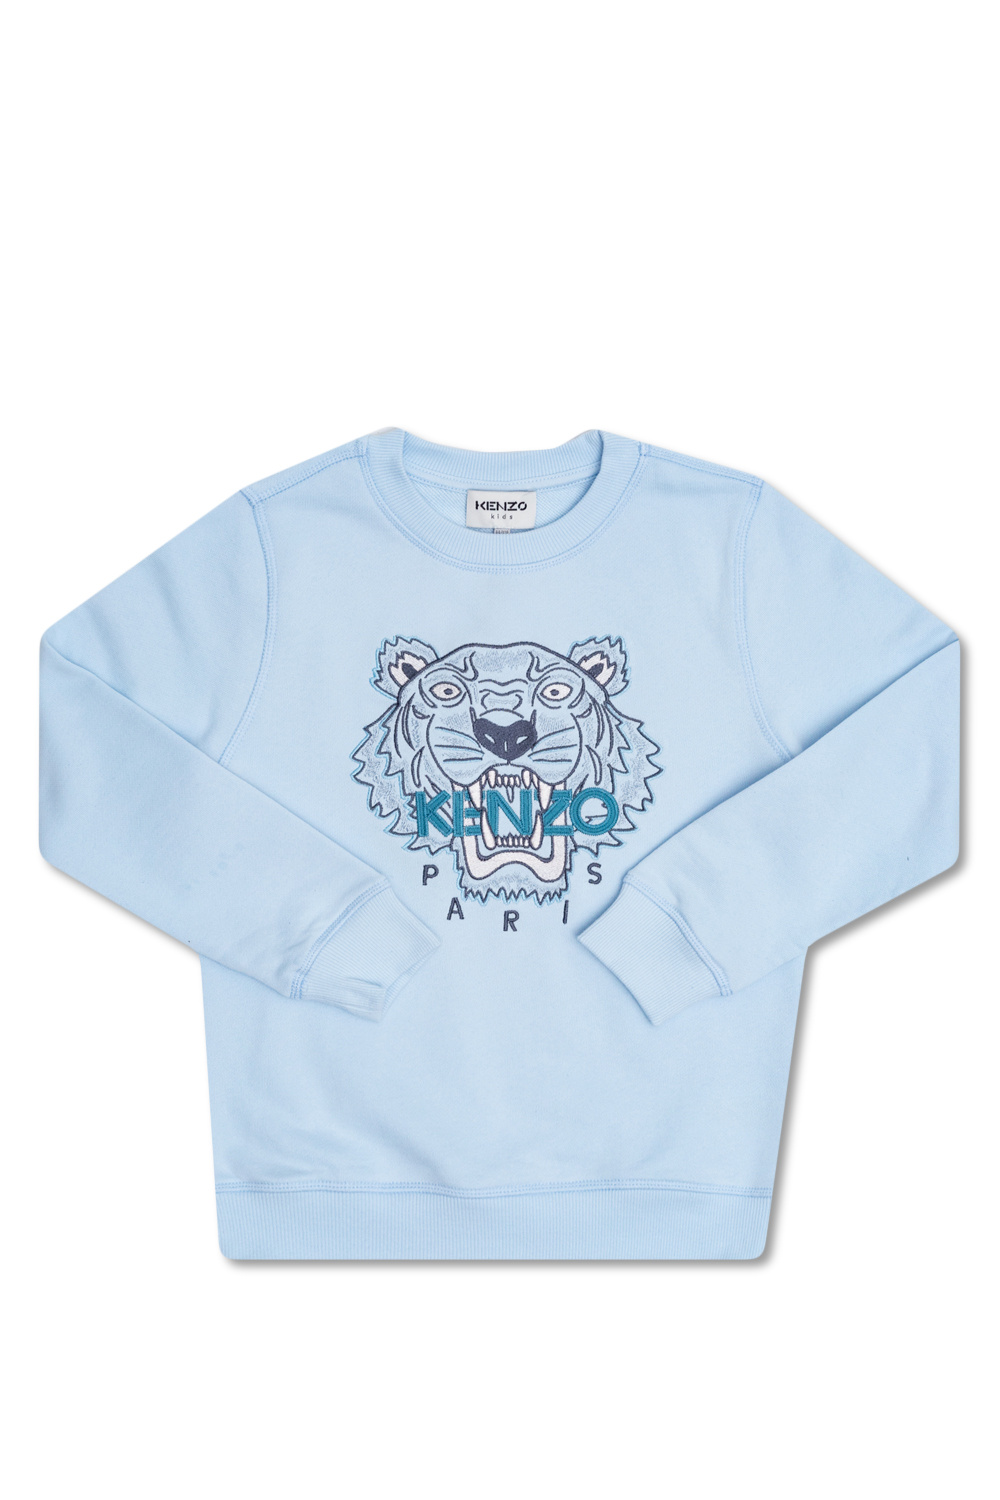 Kenzo Kids shirt with removable scarf tory burch t shirt